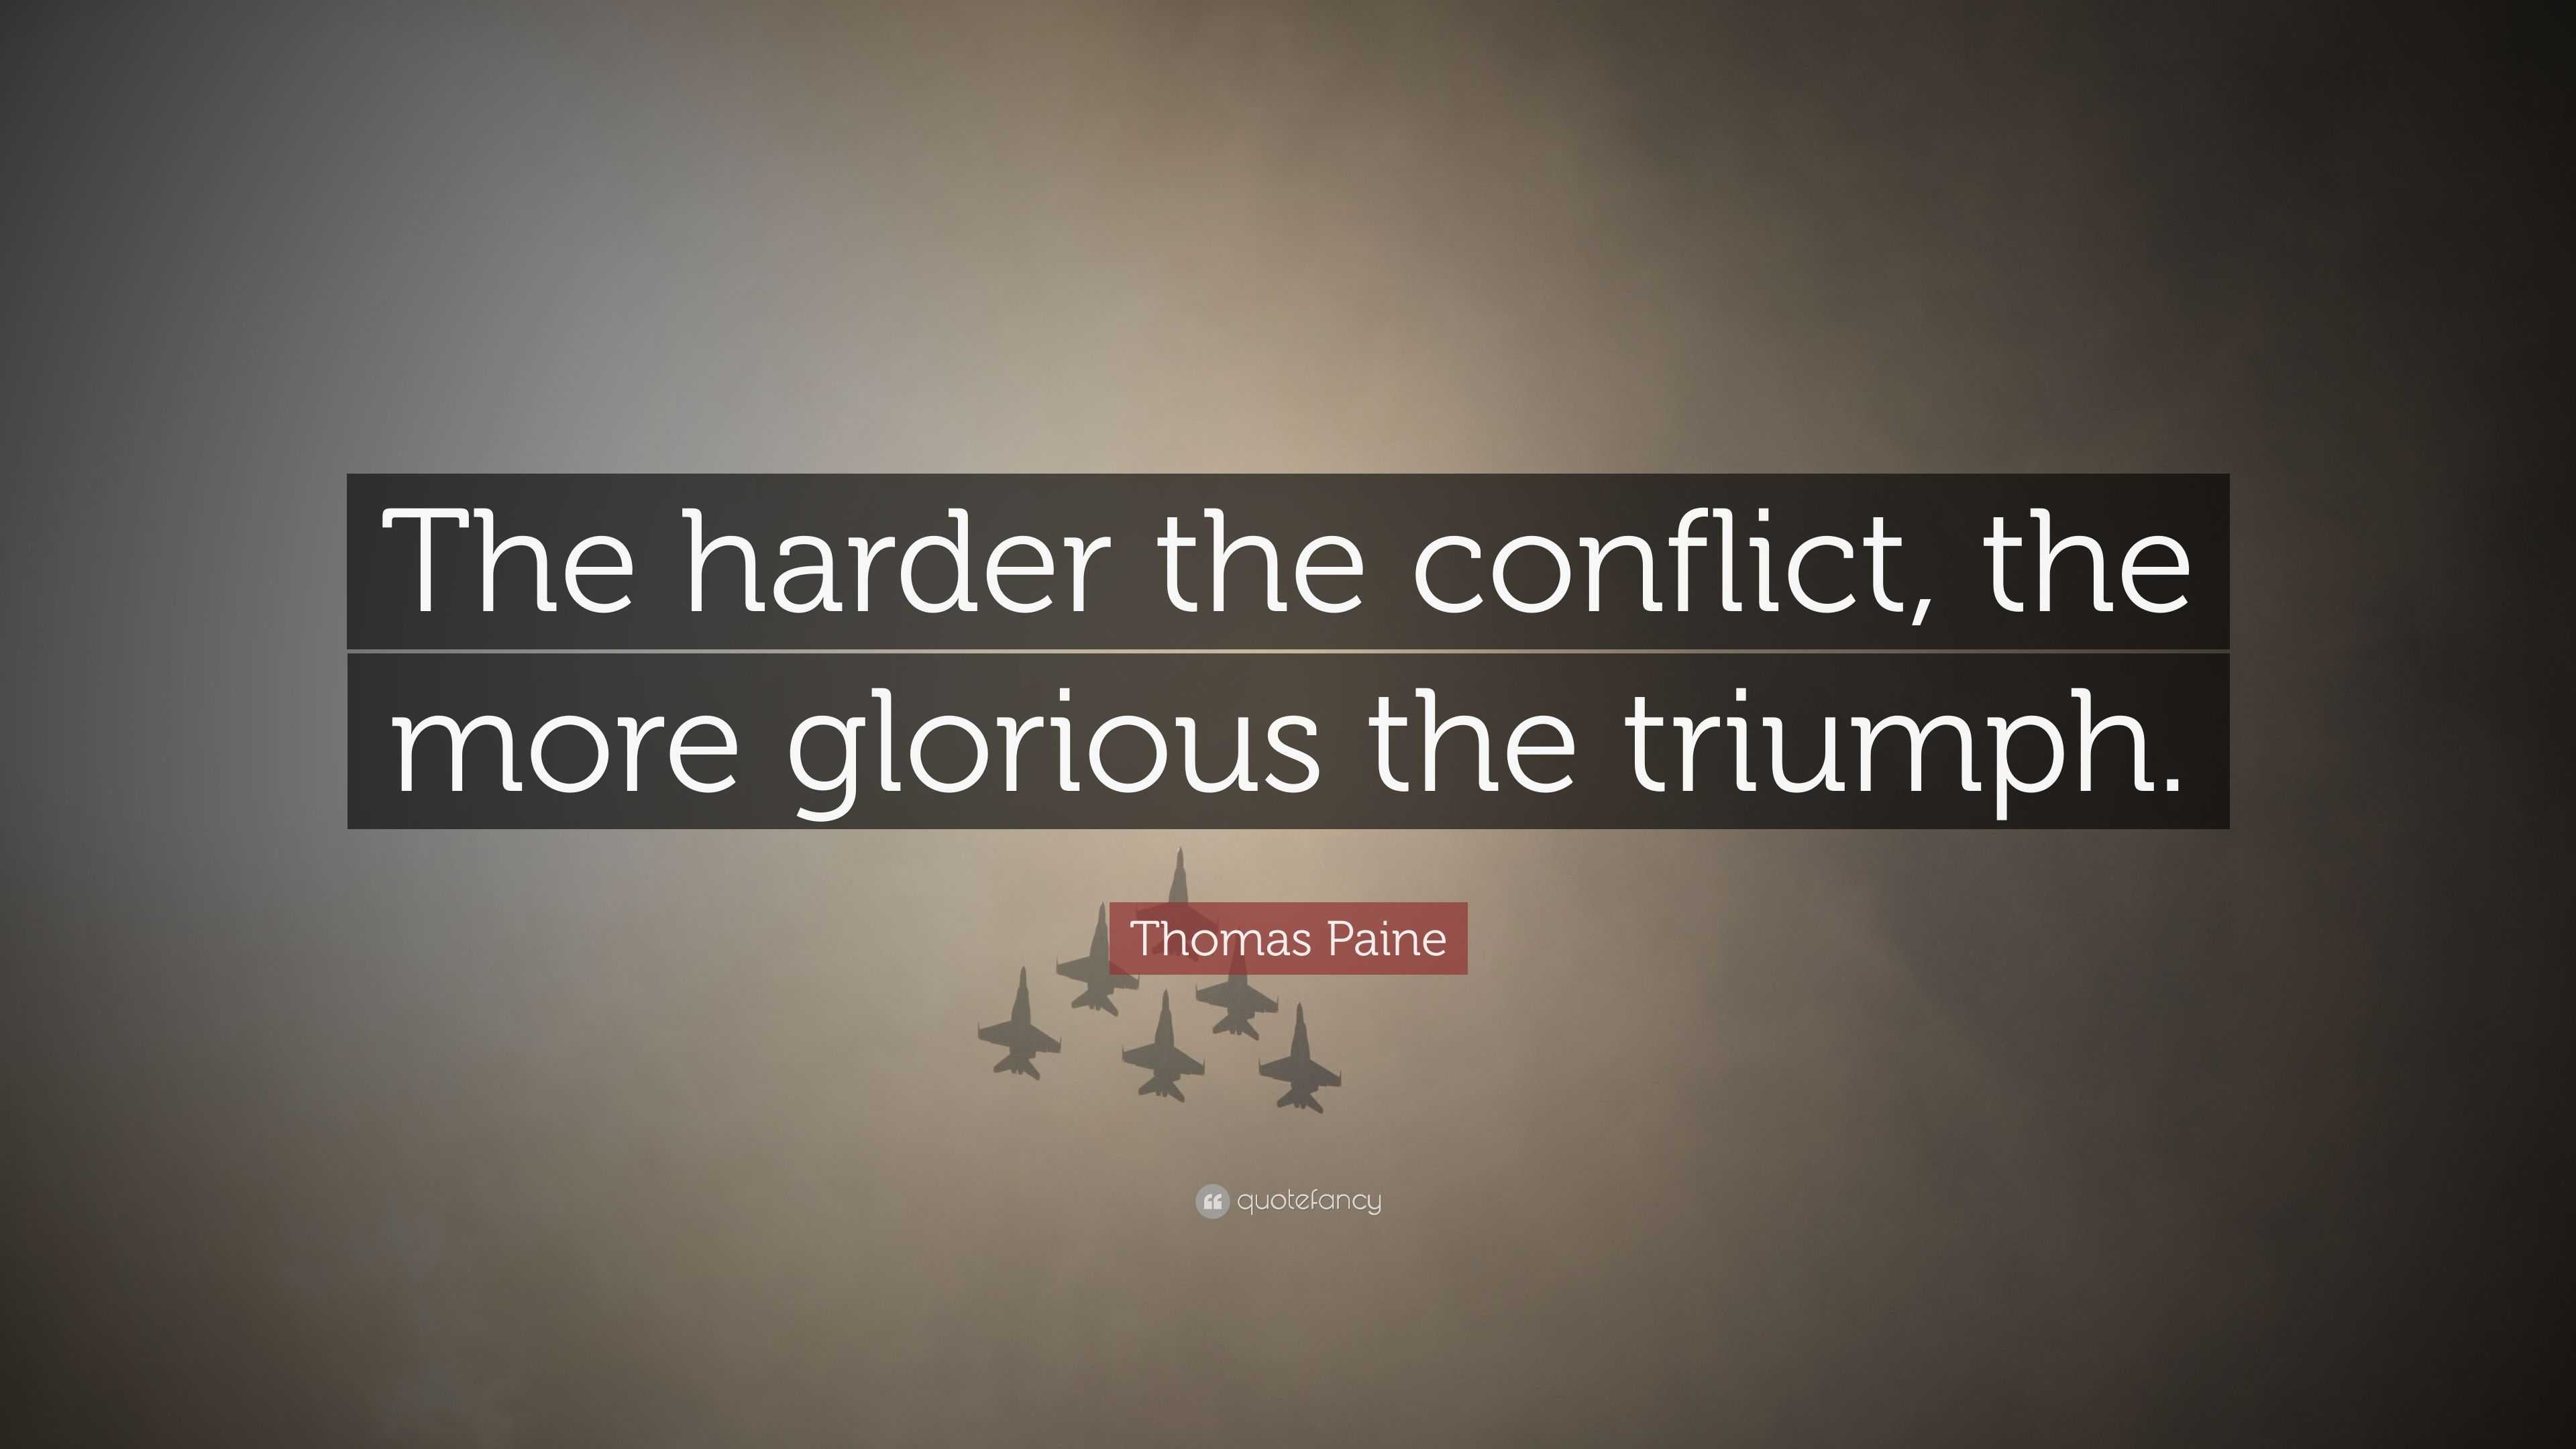 the harder the conflict the greater the triumph quote